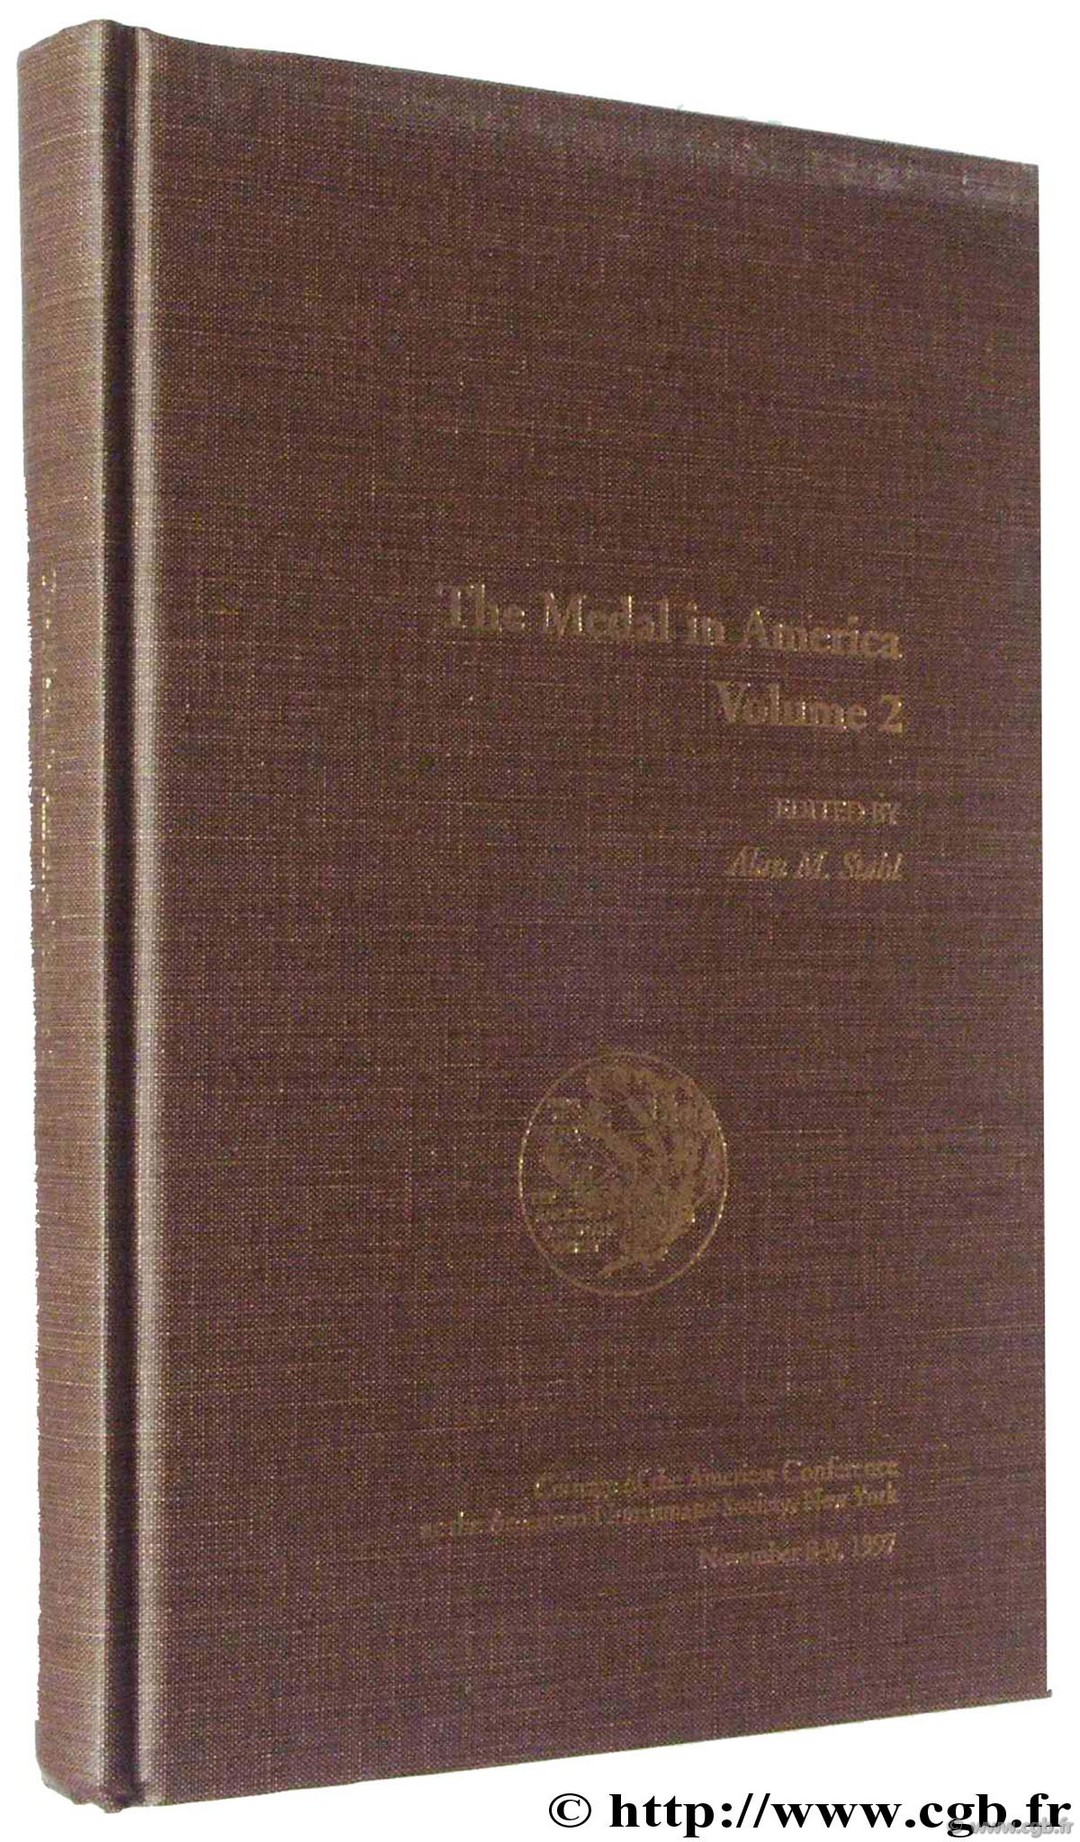 The Medal in America volume 2, Coinage of the Americas Conférence at the American Numismatic Society, New York November 8-9, 1997 